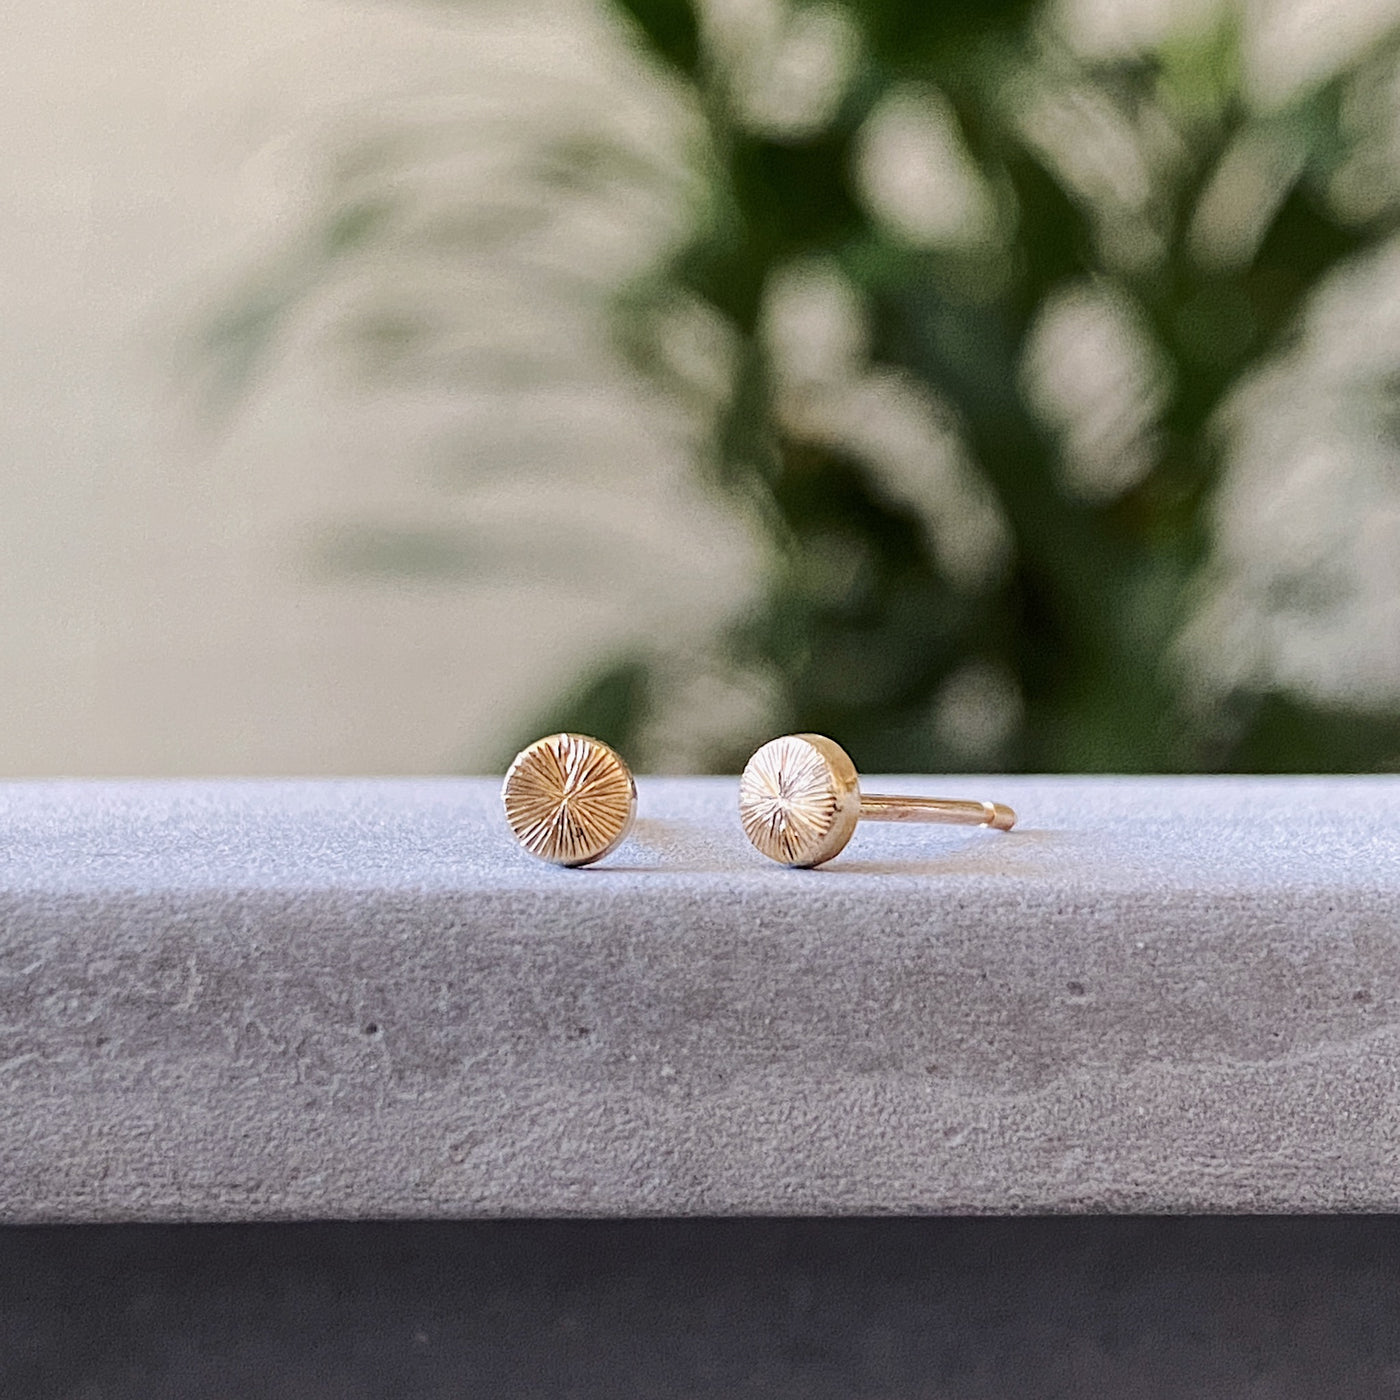 Tiny engraved gold stud earring by Corey Egan on concrete